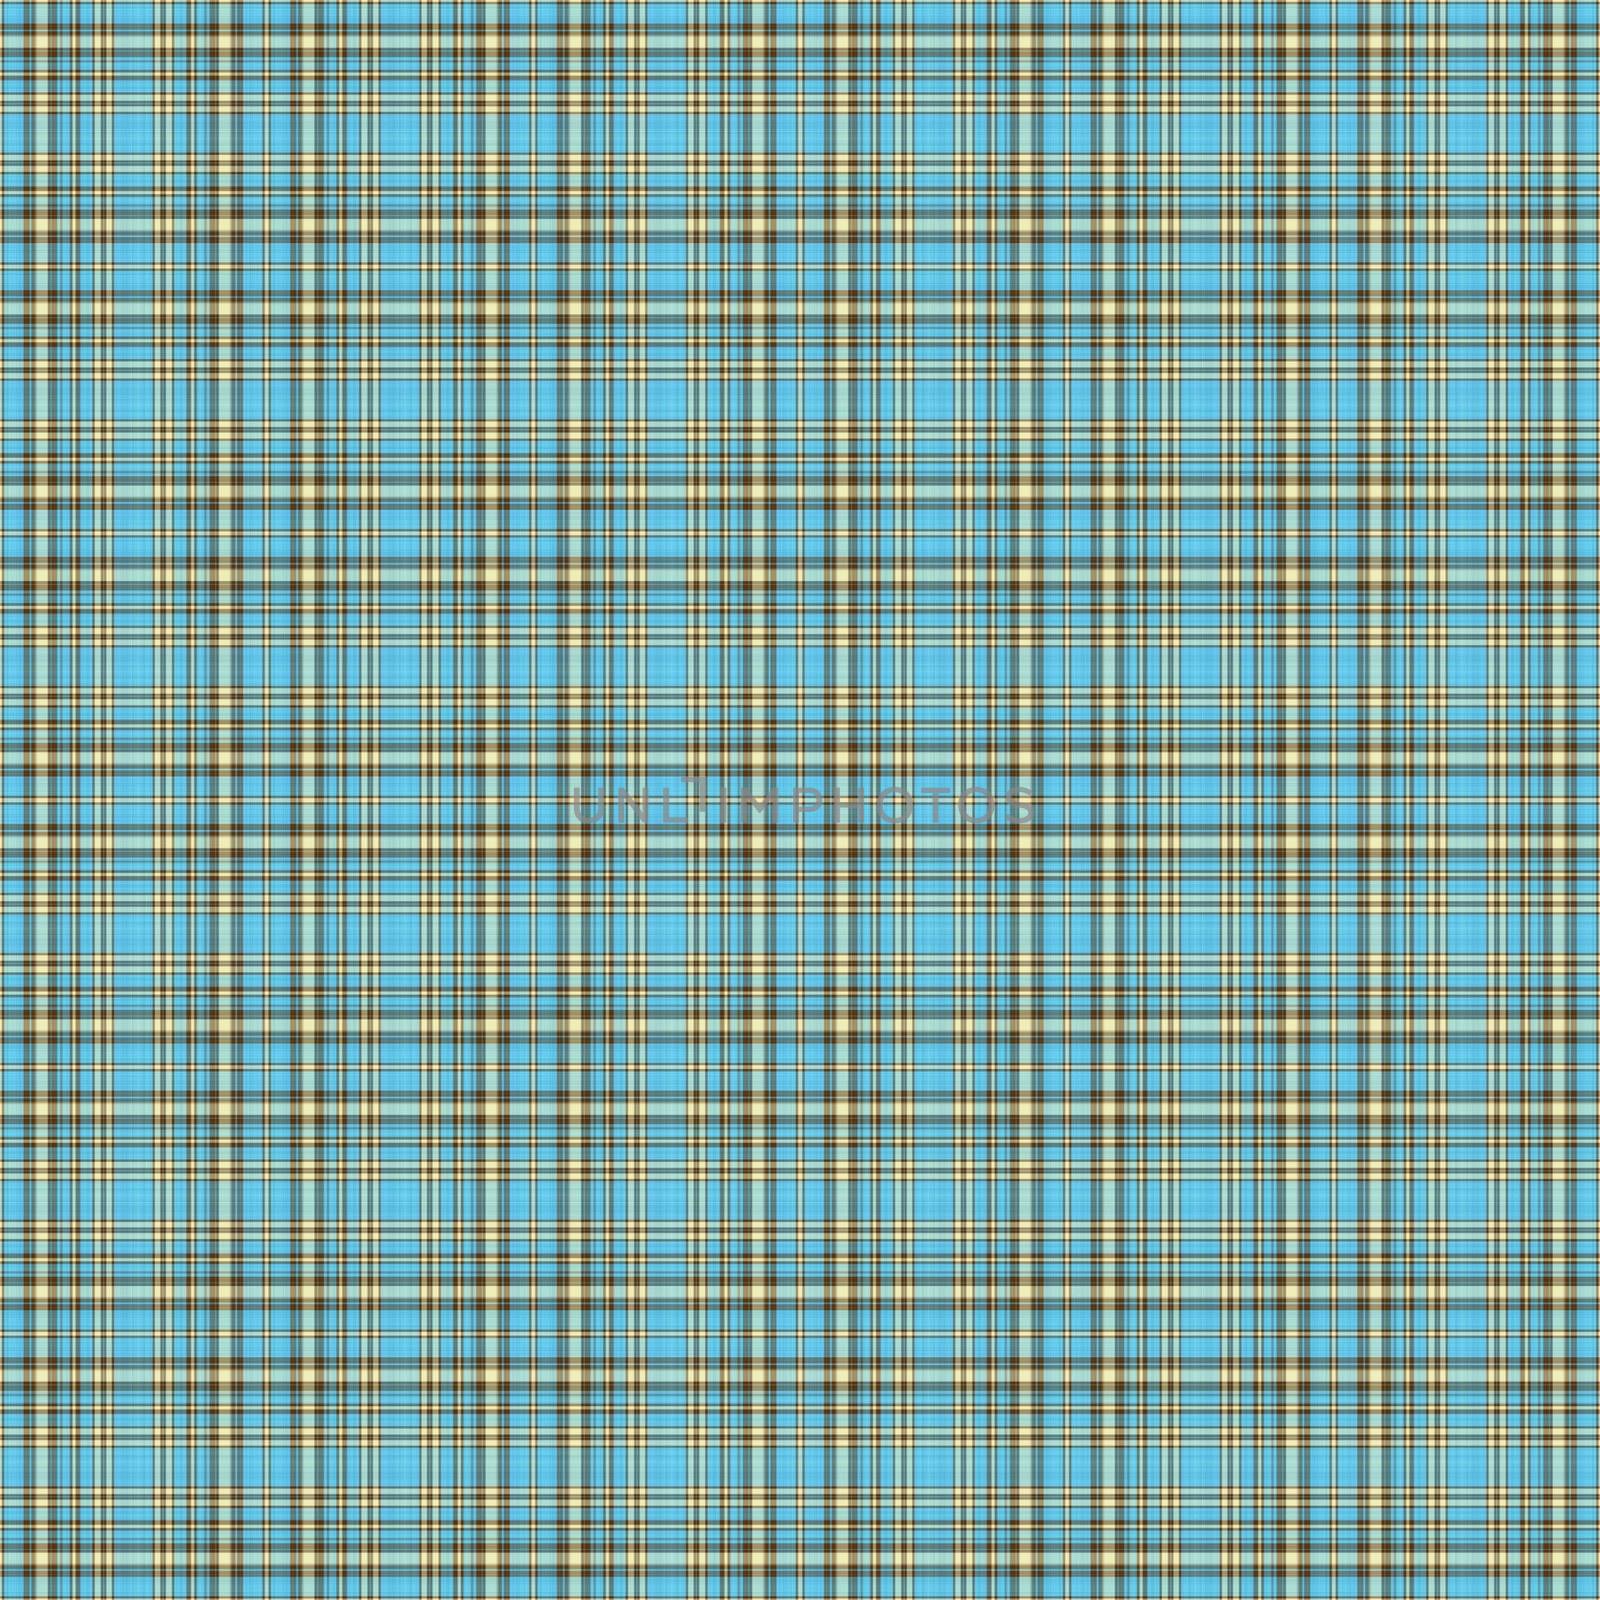 Seamless Aqua & Brown Plaid Background by SongPixels